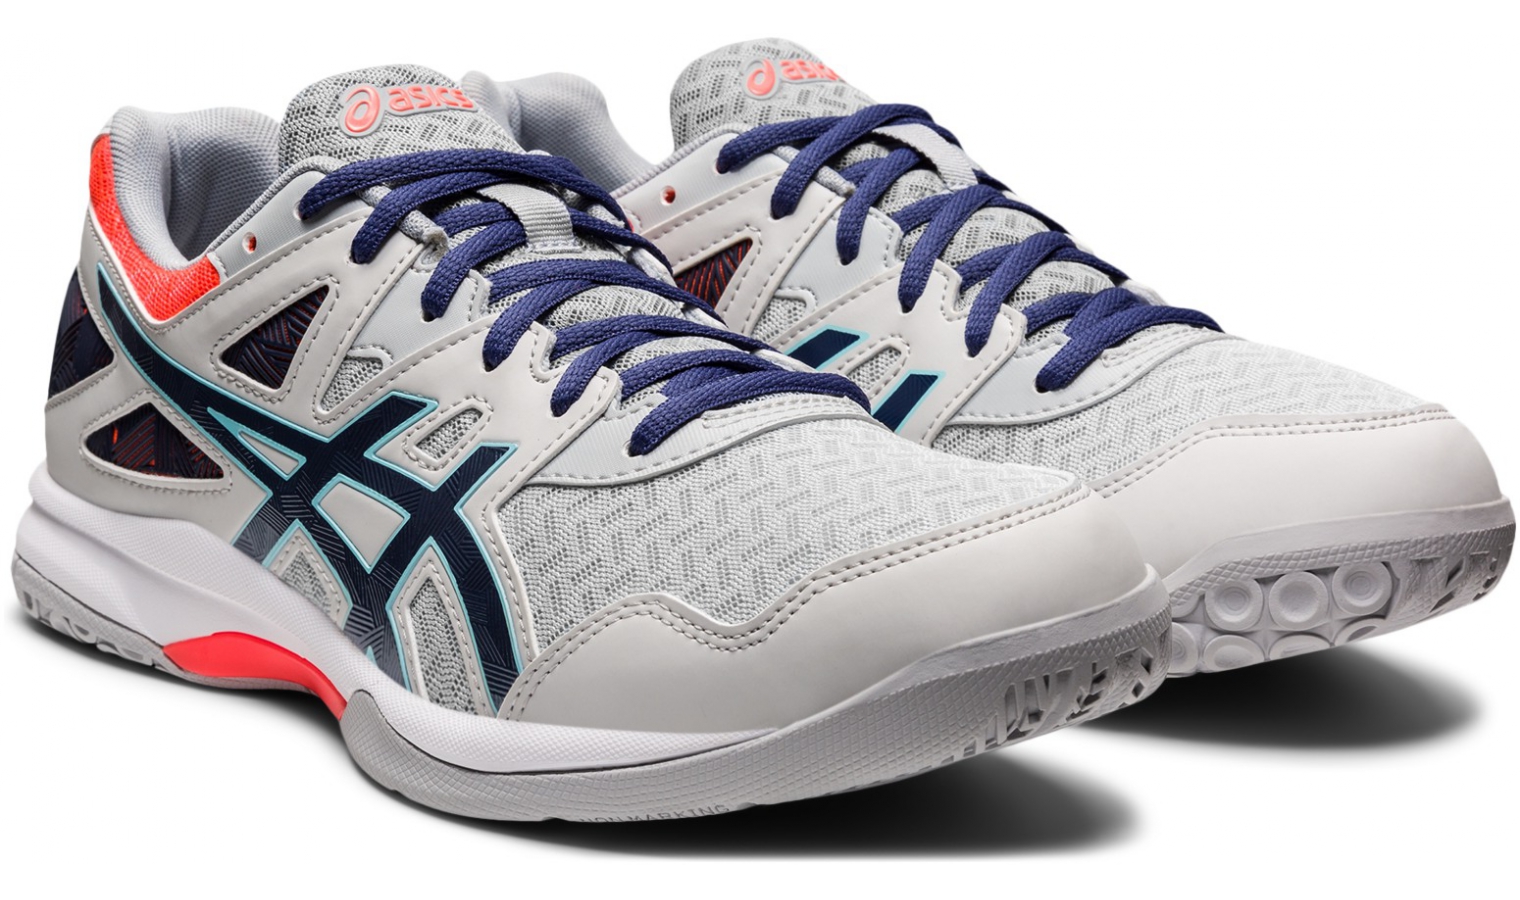 Mens volleyball shoes Asics GEL-TASK 2 | AD Sport.store